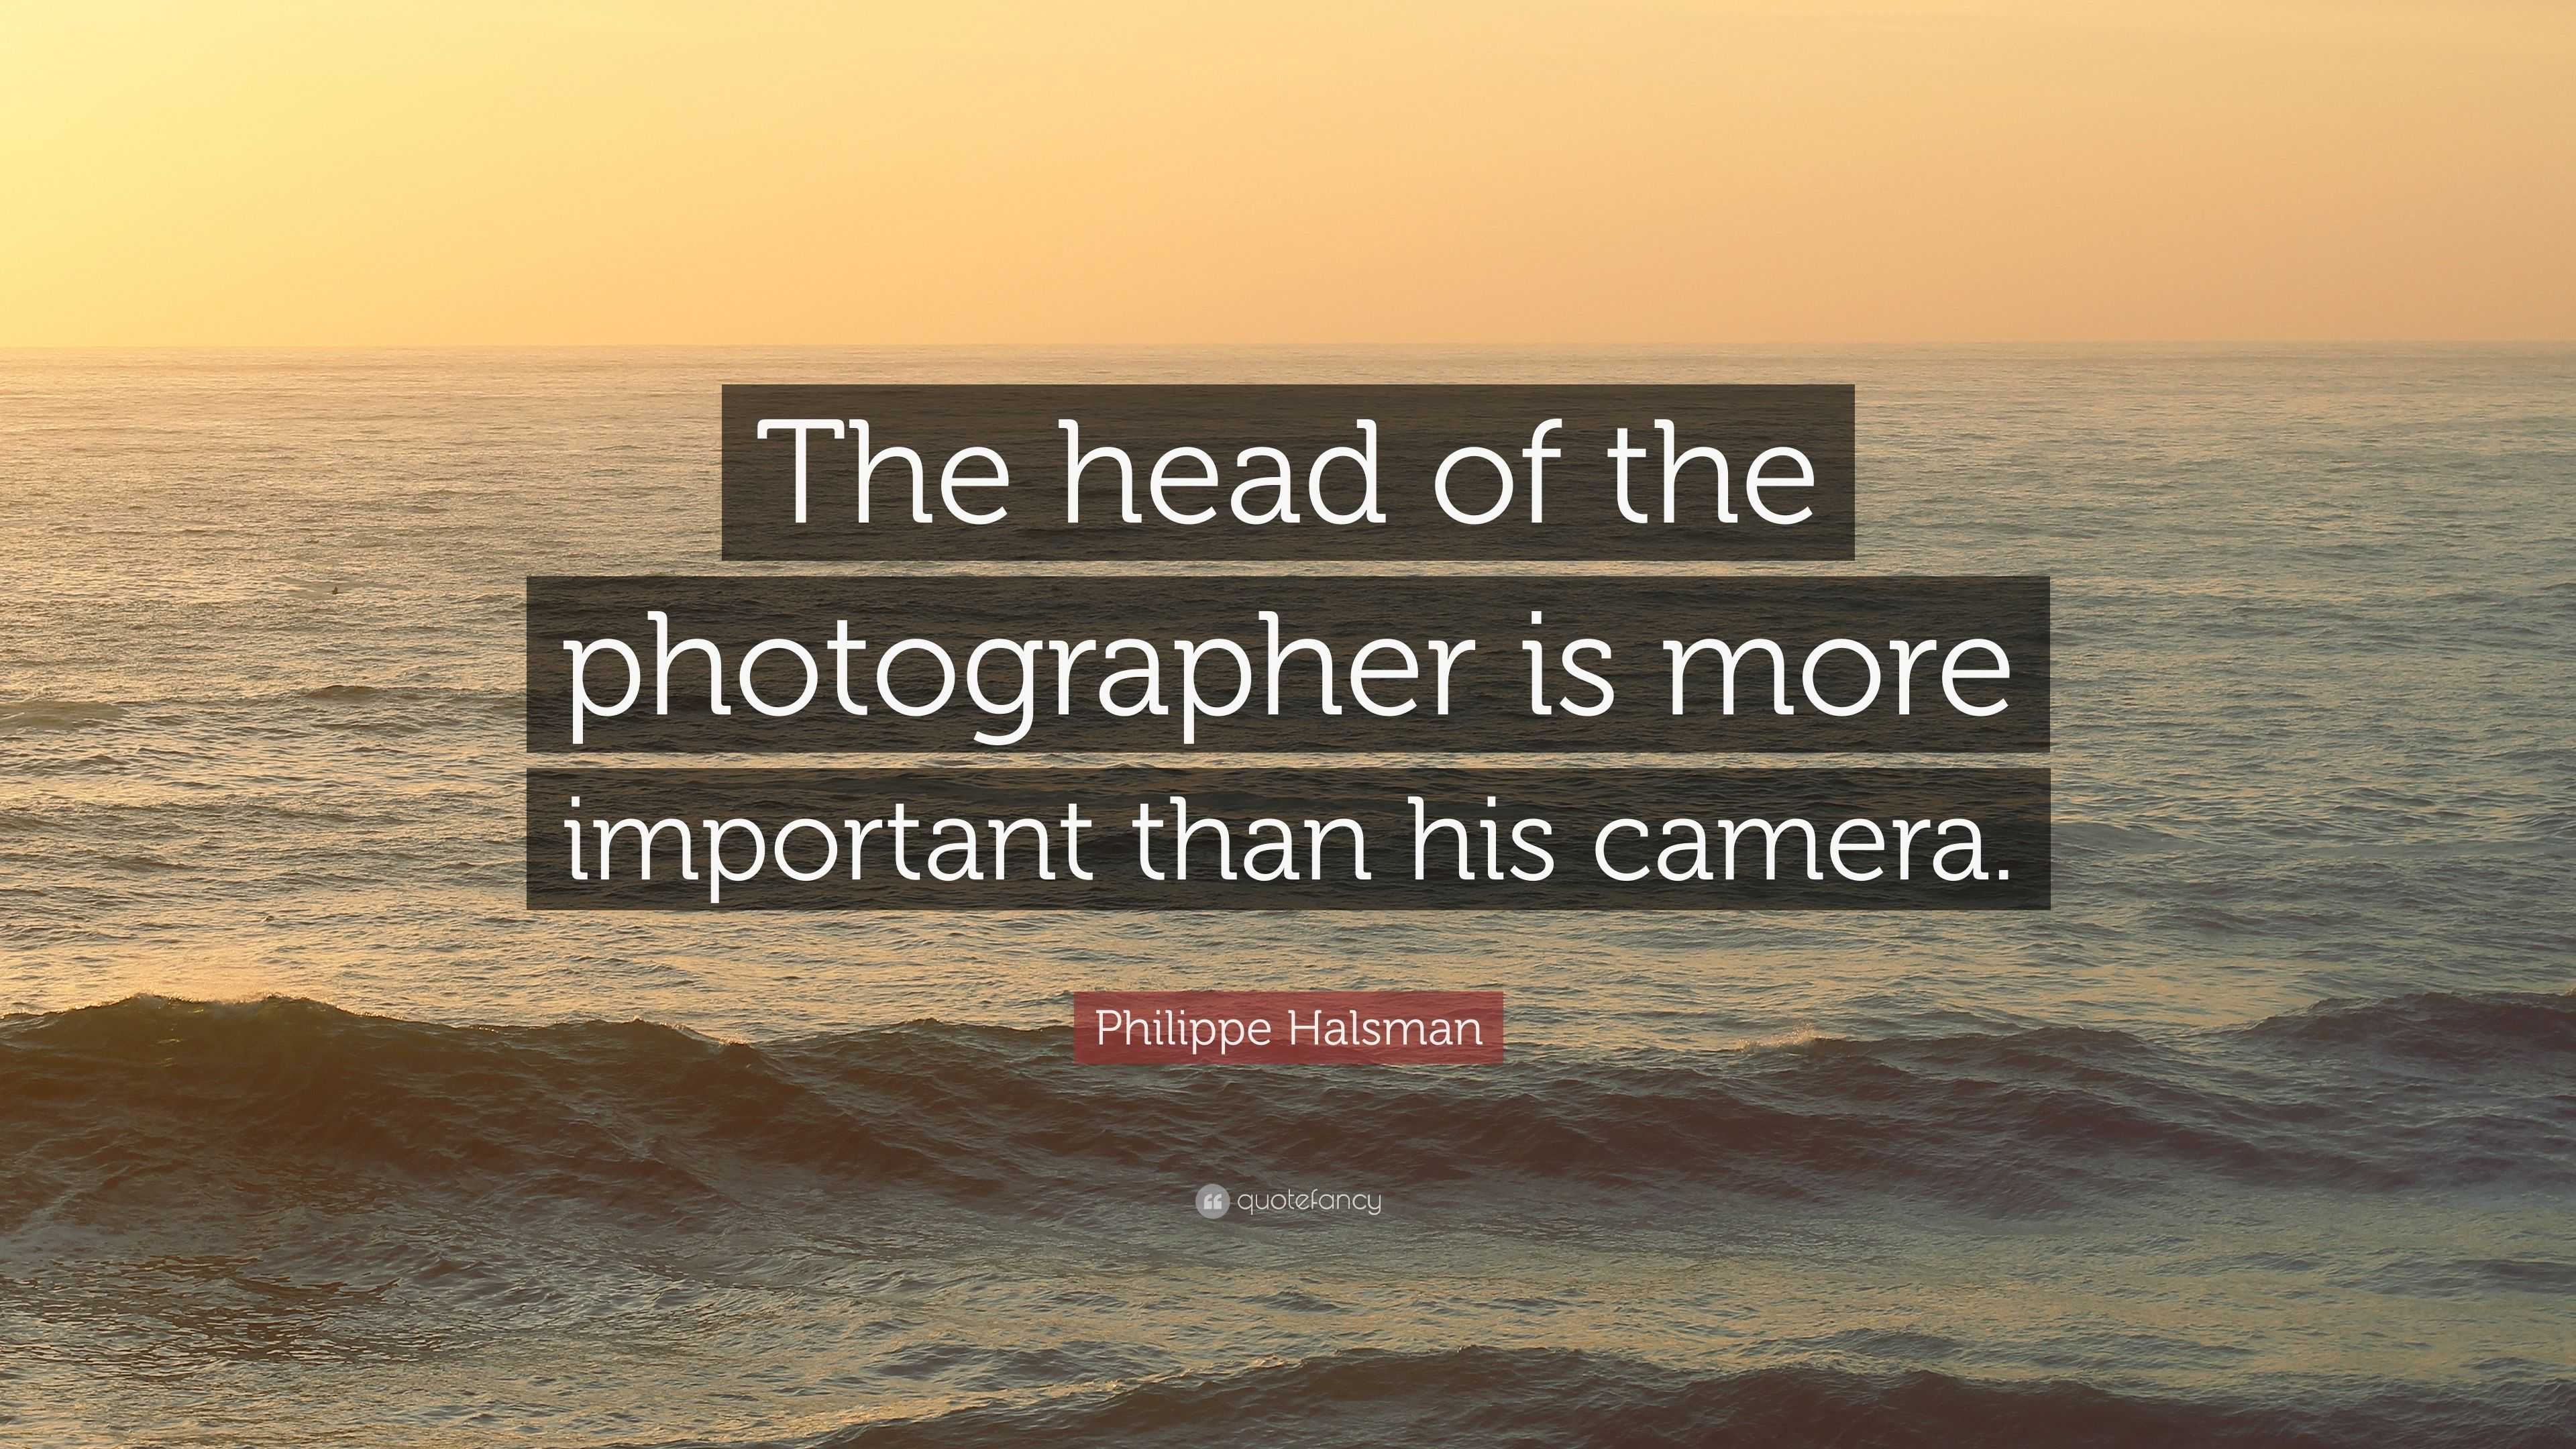 Philippe Halsman Quote: “The head of the photographer is more important ...